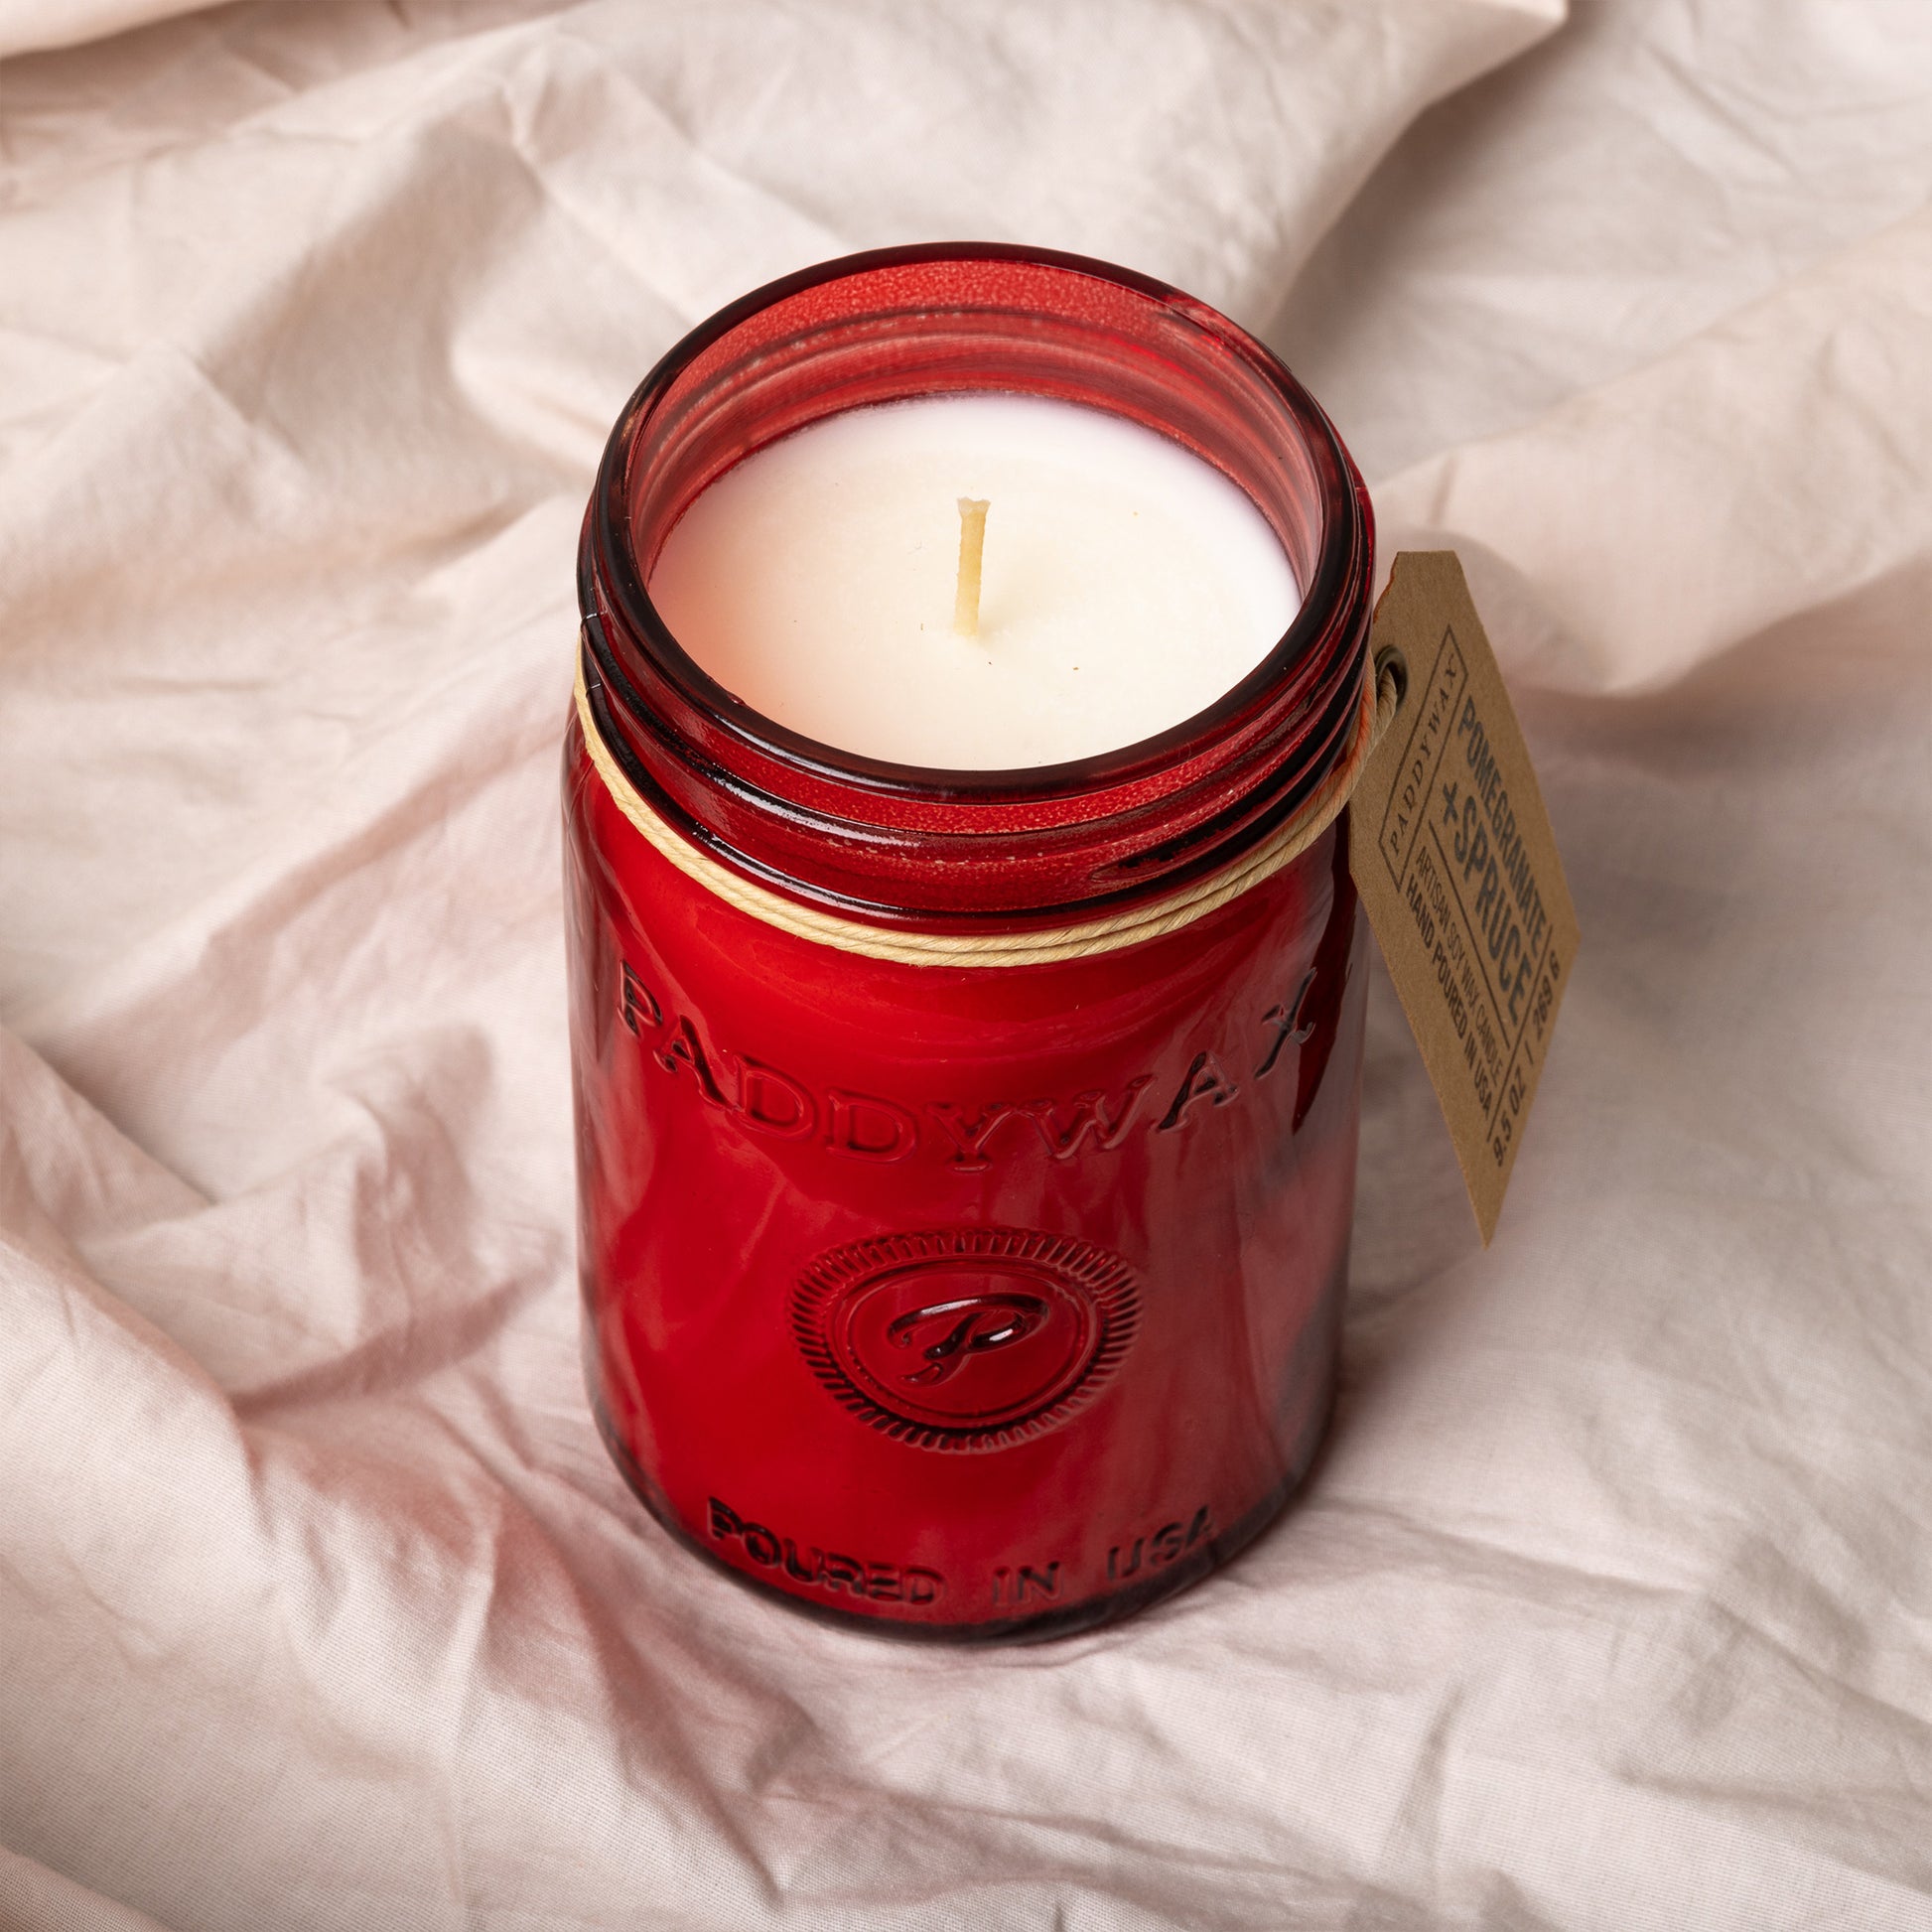 New Paddywax Candle Blood Orange Glass Jar and Box